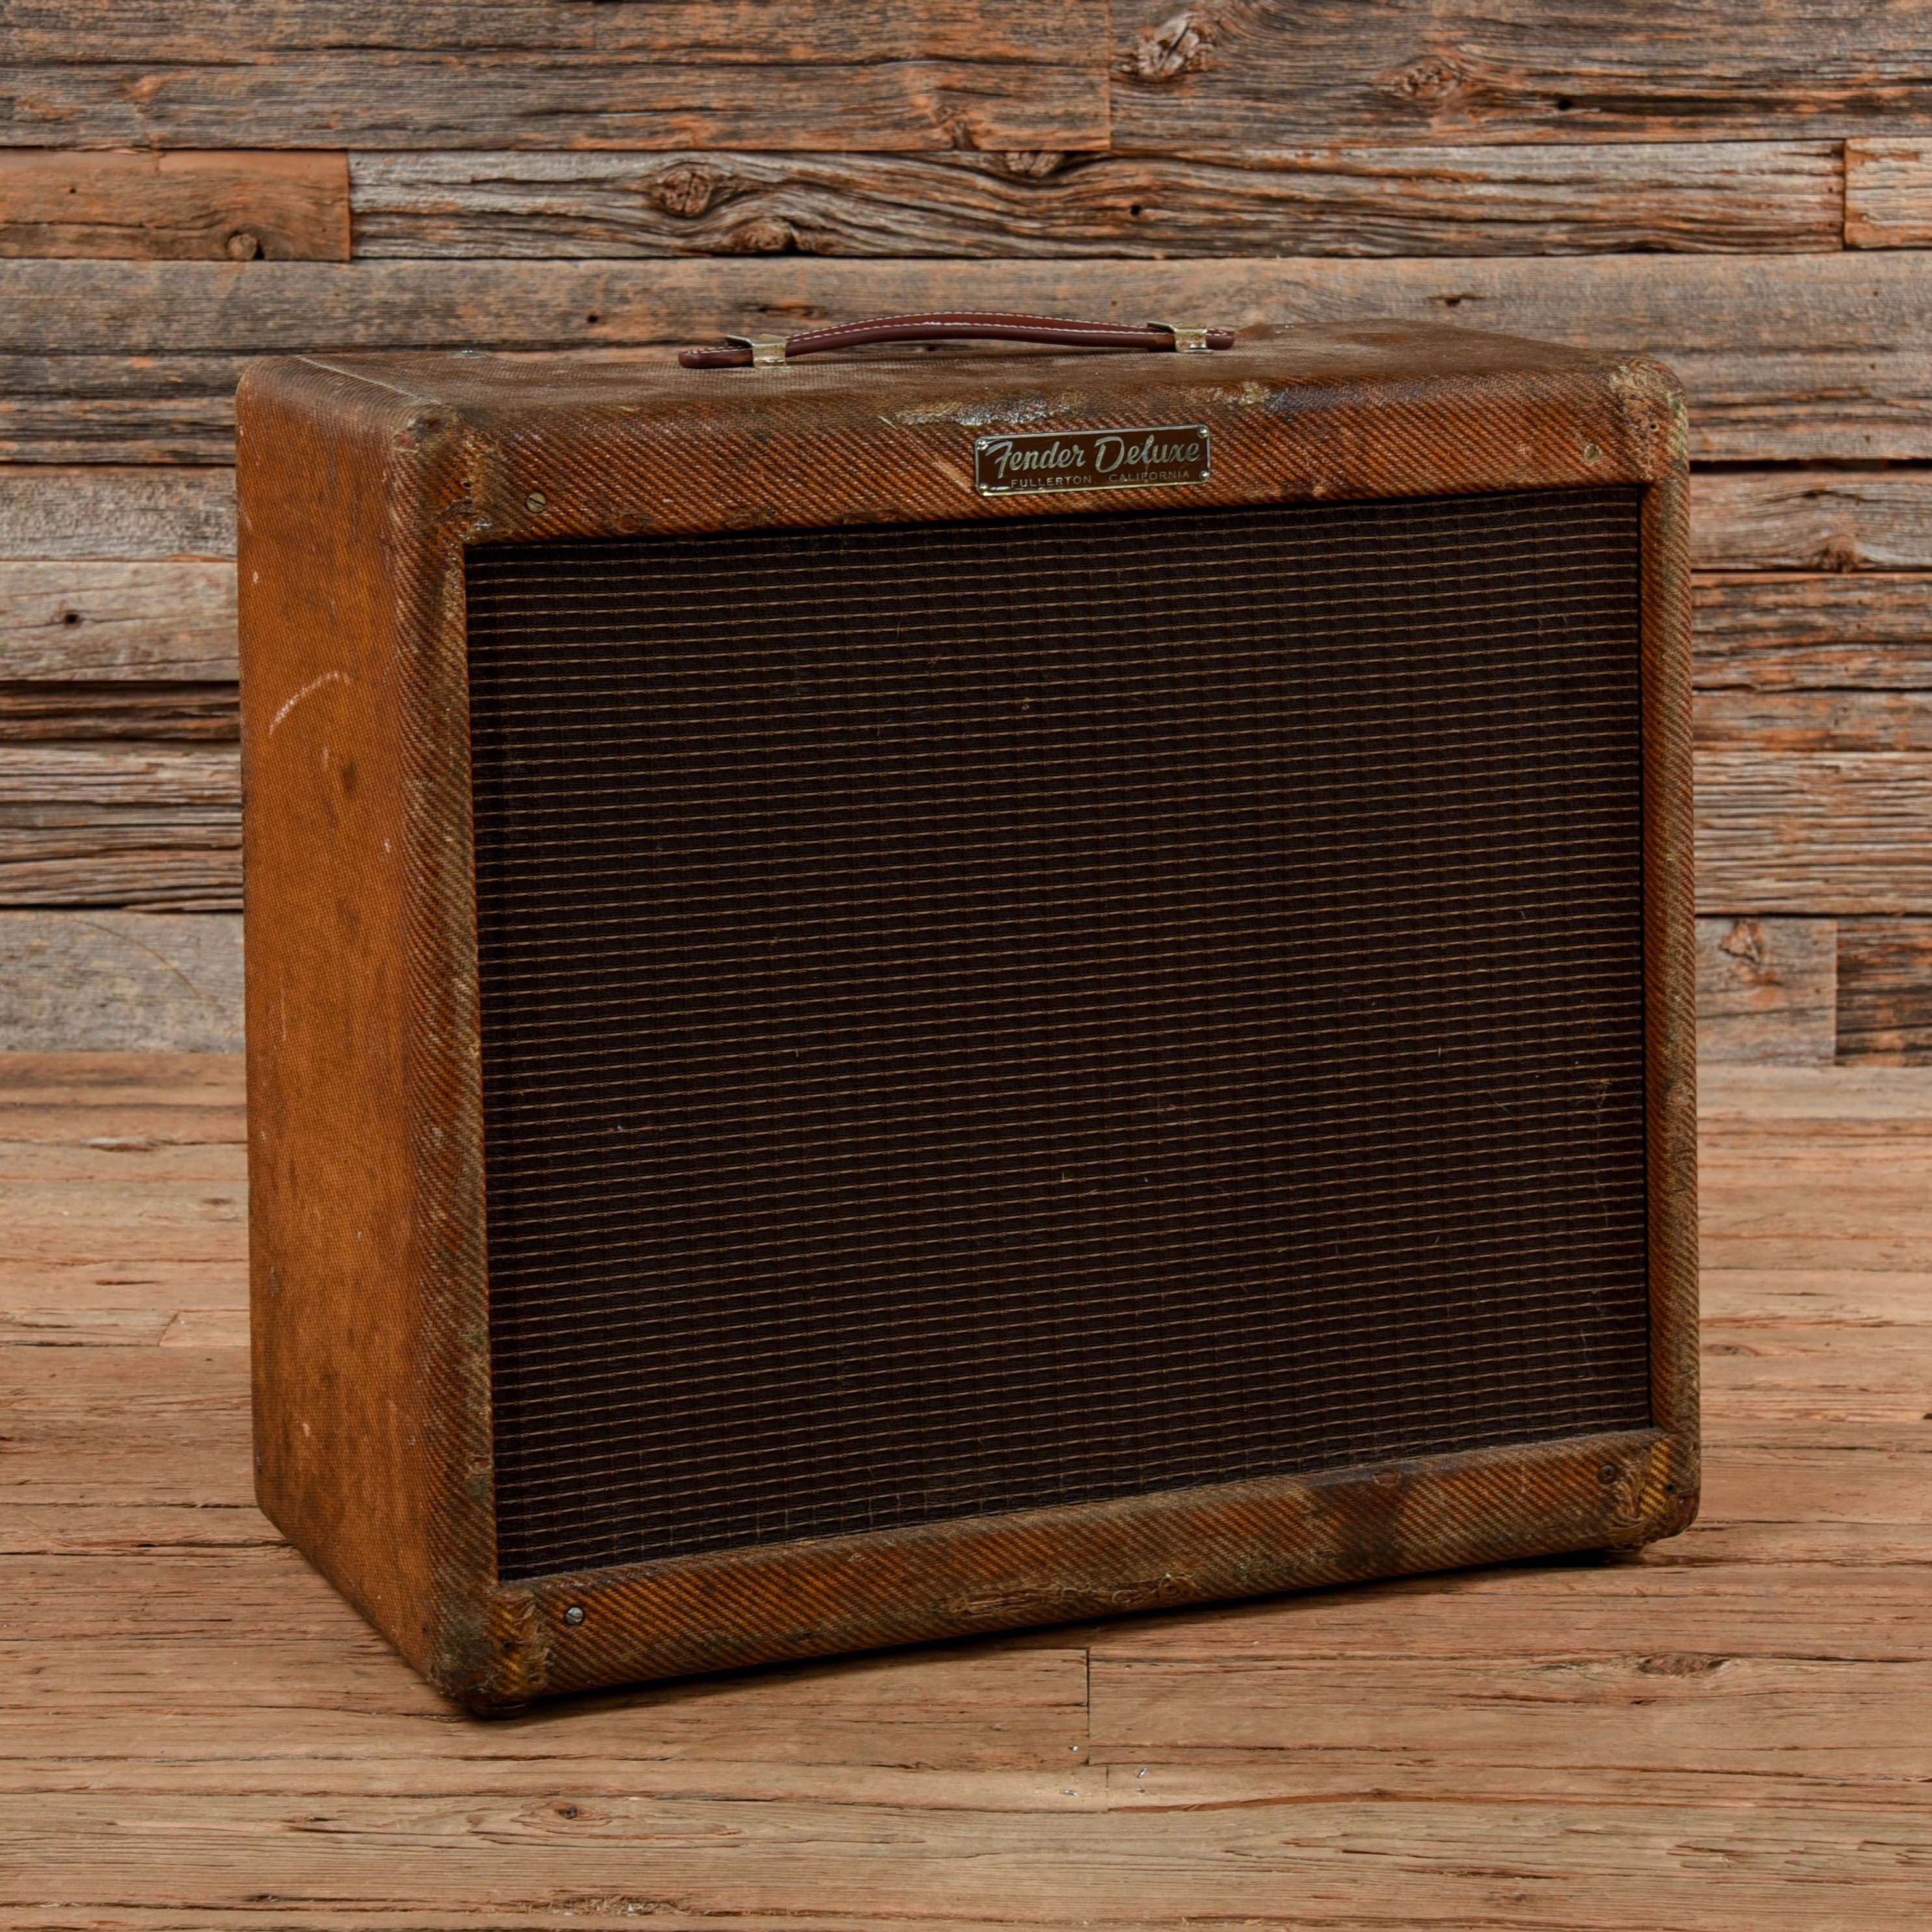 Fender Deluxe 5E3 Tweed 1960 Amps / Guitar Cabinets